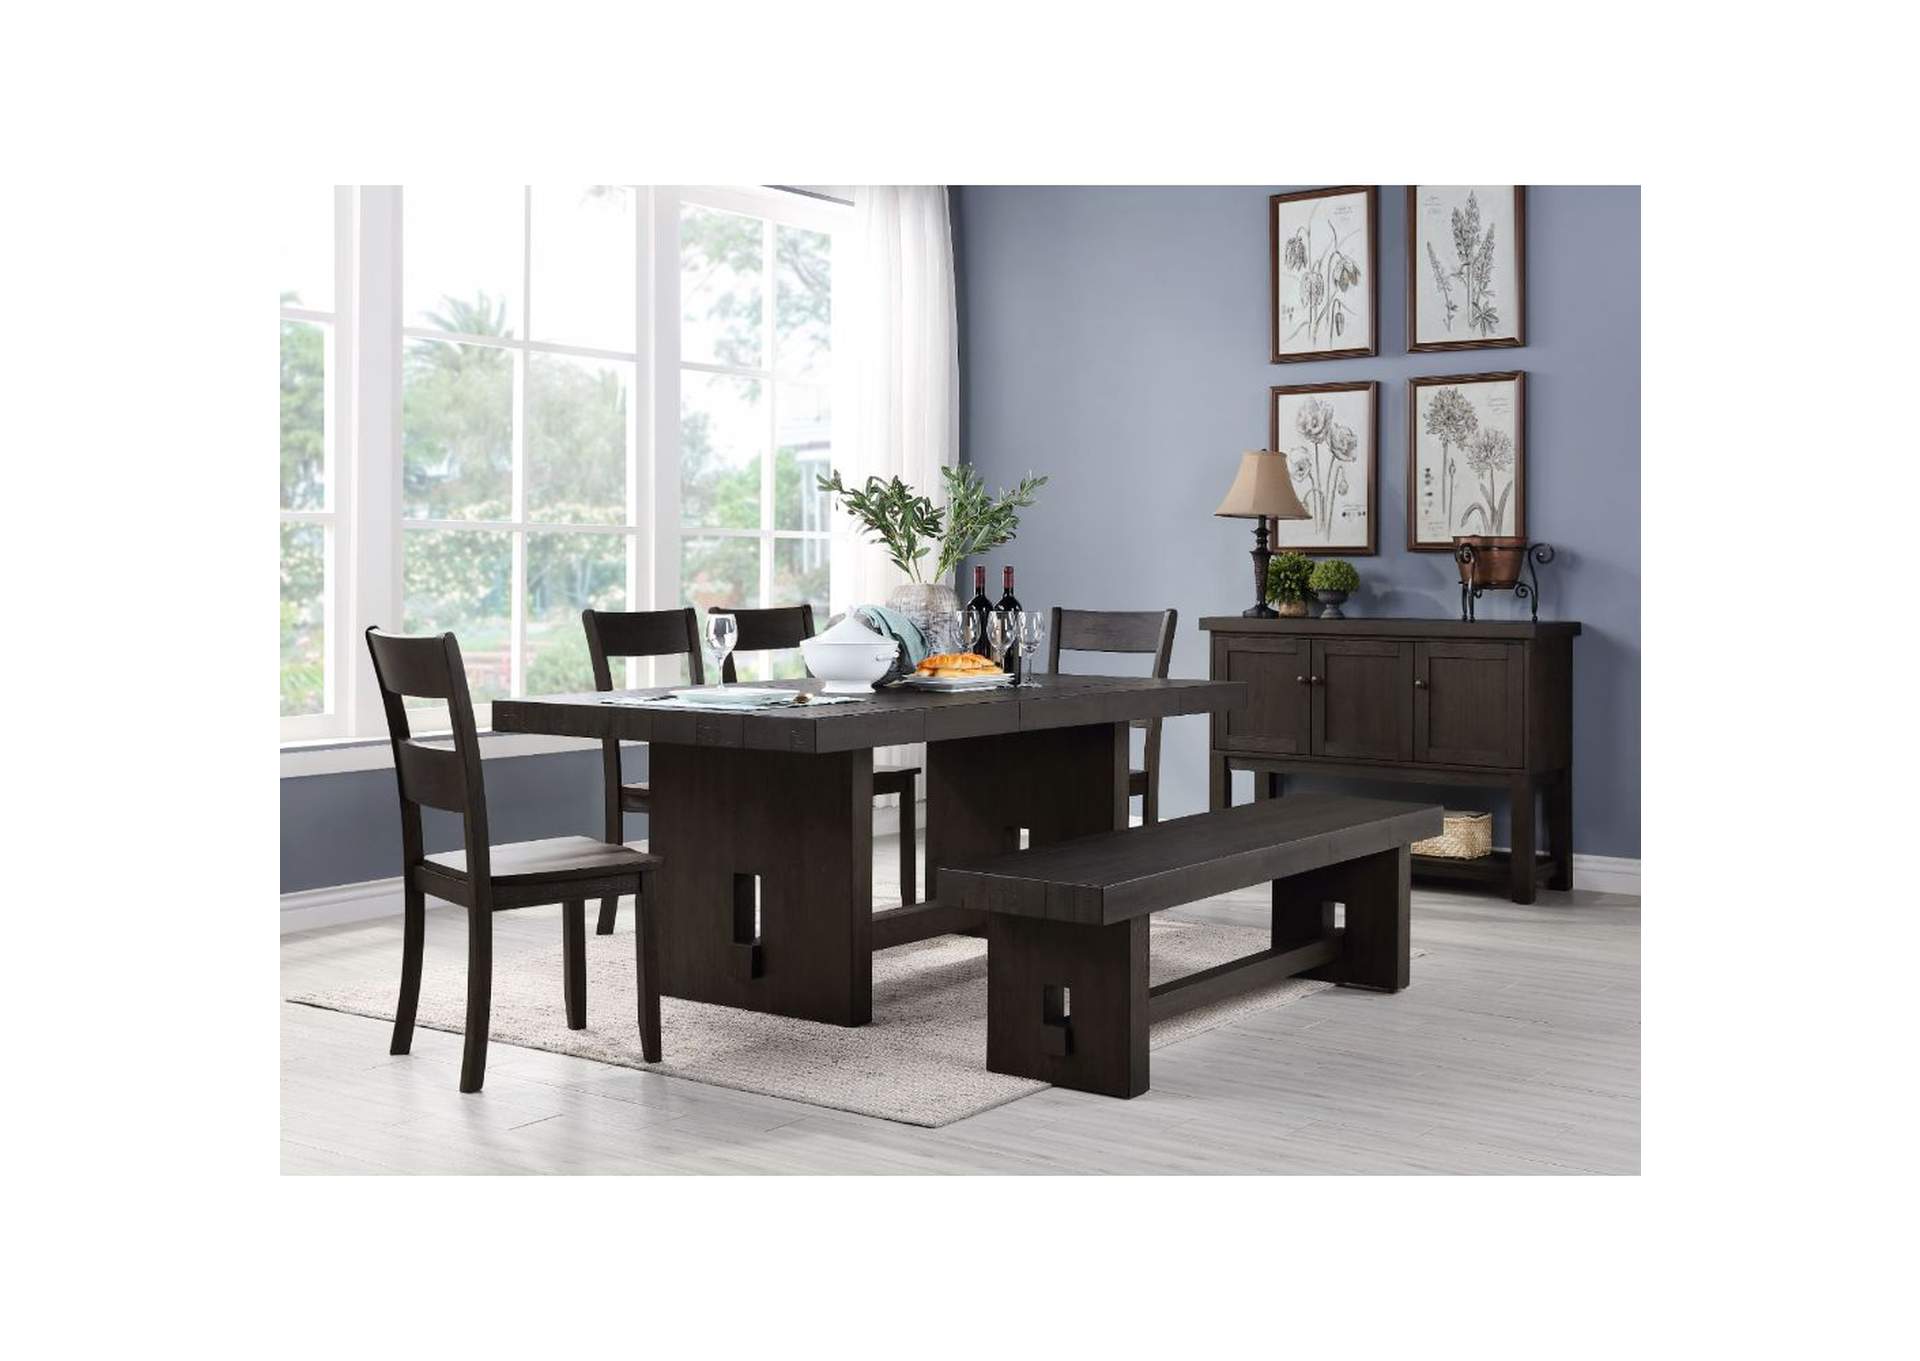 Walnut Dining Room : China Modern Home Living Room Furniture Wooden Walnut Dining Table China Dining Table Wooden Table : Free delivery and returns on ebay plus items for plus members.